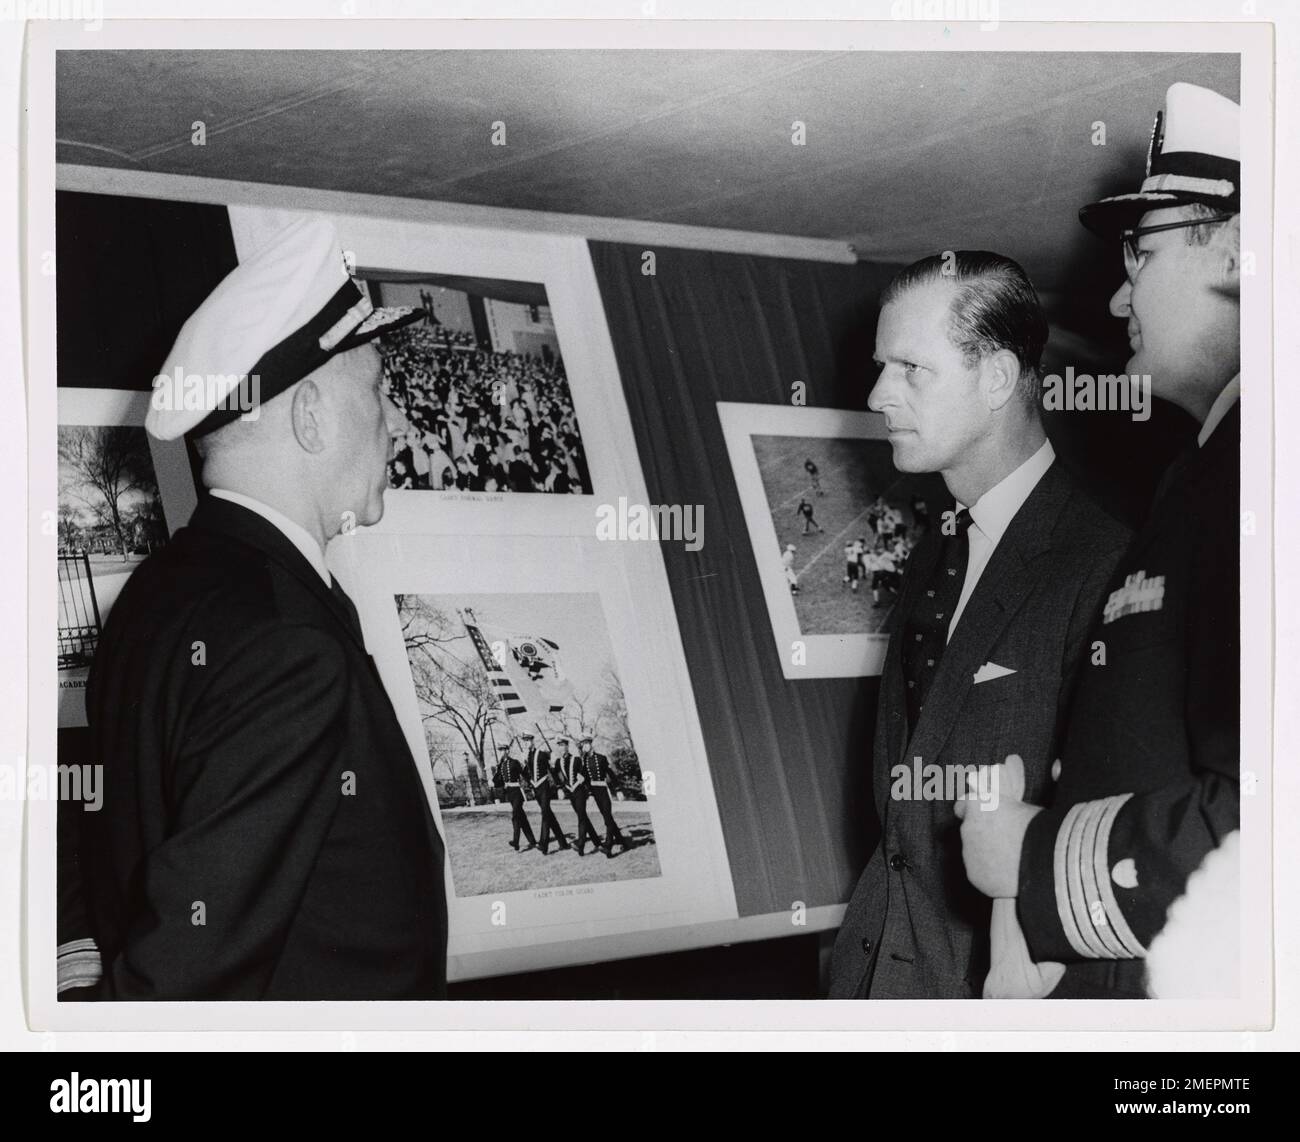 H.R.H. Prince Philip, the Duke of Edinburgh, viewing a mounted photograph display. Stock Photo